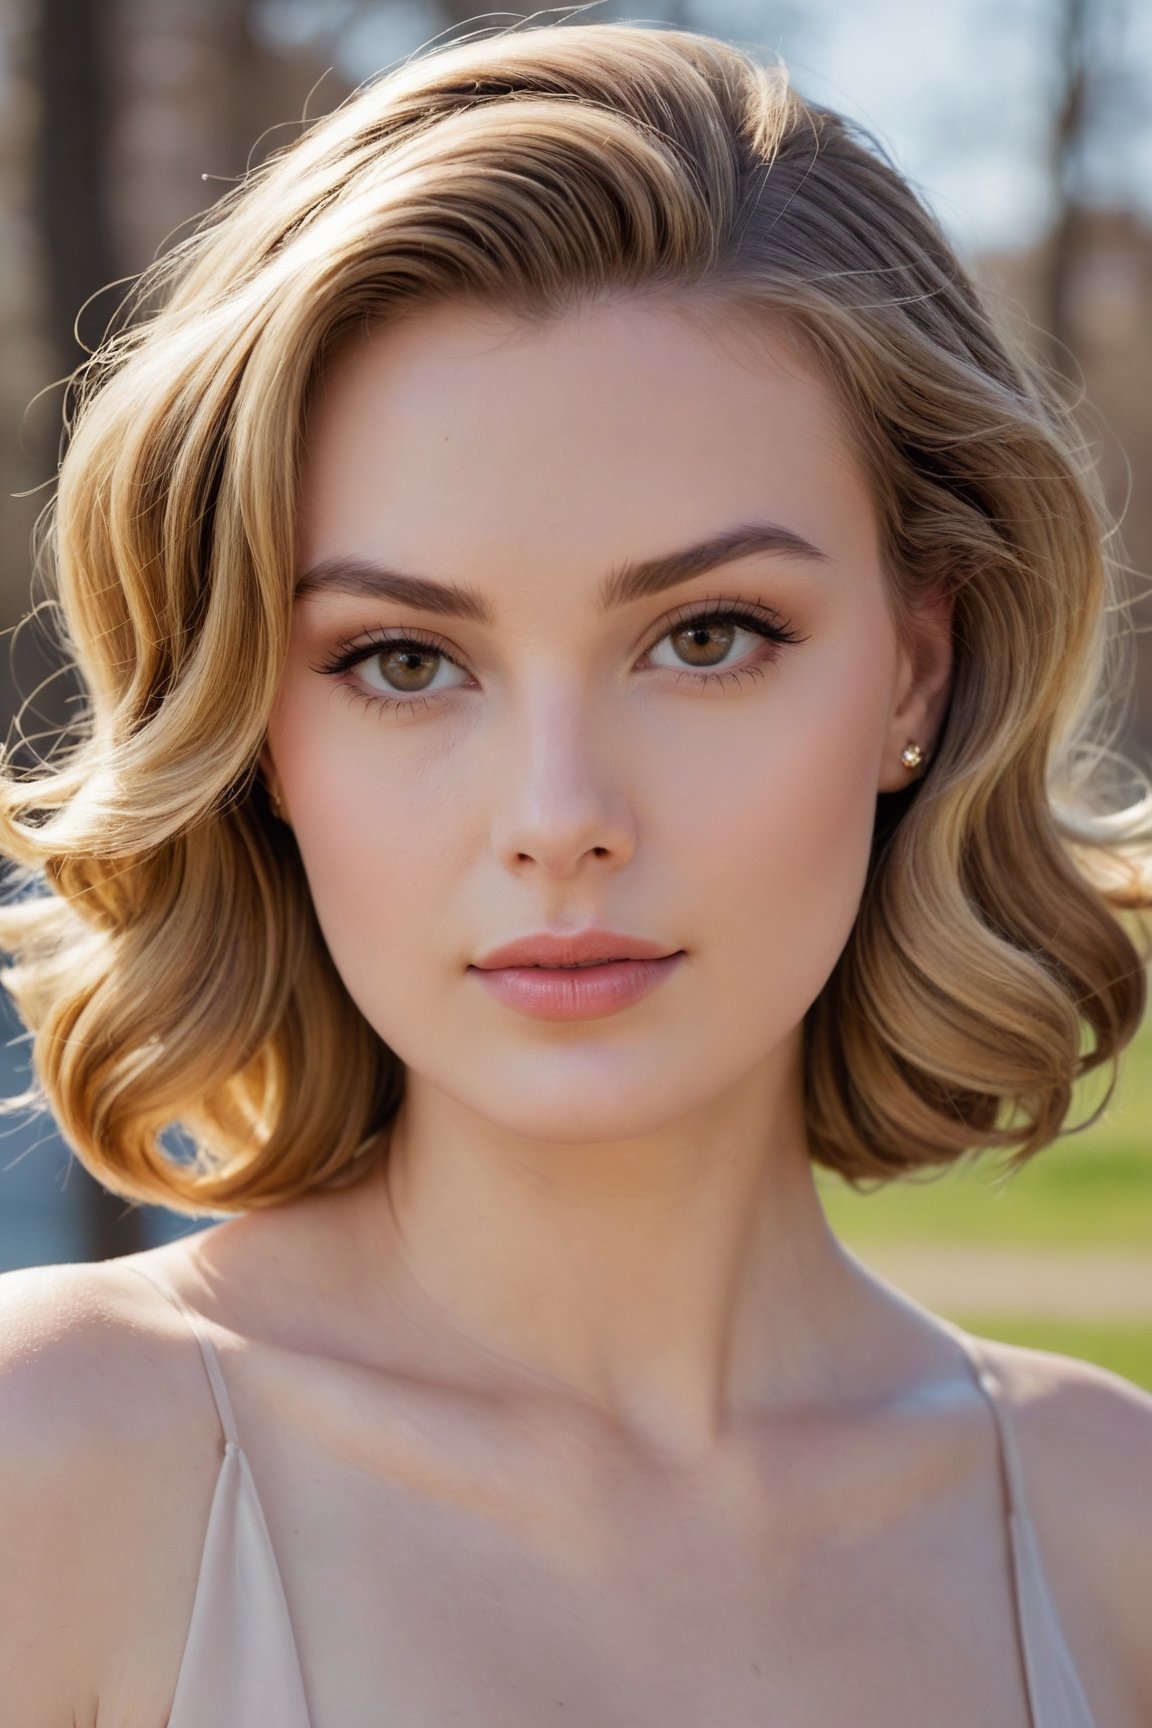 headshot,Nudity,Naked,Nude,No Clothes,Brown with golden highlights hair,face similar to Grace Kelly,Russian,pale skin,Wavy bob Hairstyle,Negative space makeup,21 year old,Boyish_normal_breasts,headshot,Sunny Day Spring,Posing for a photo




